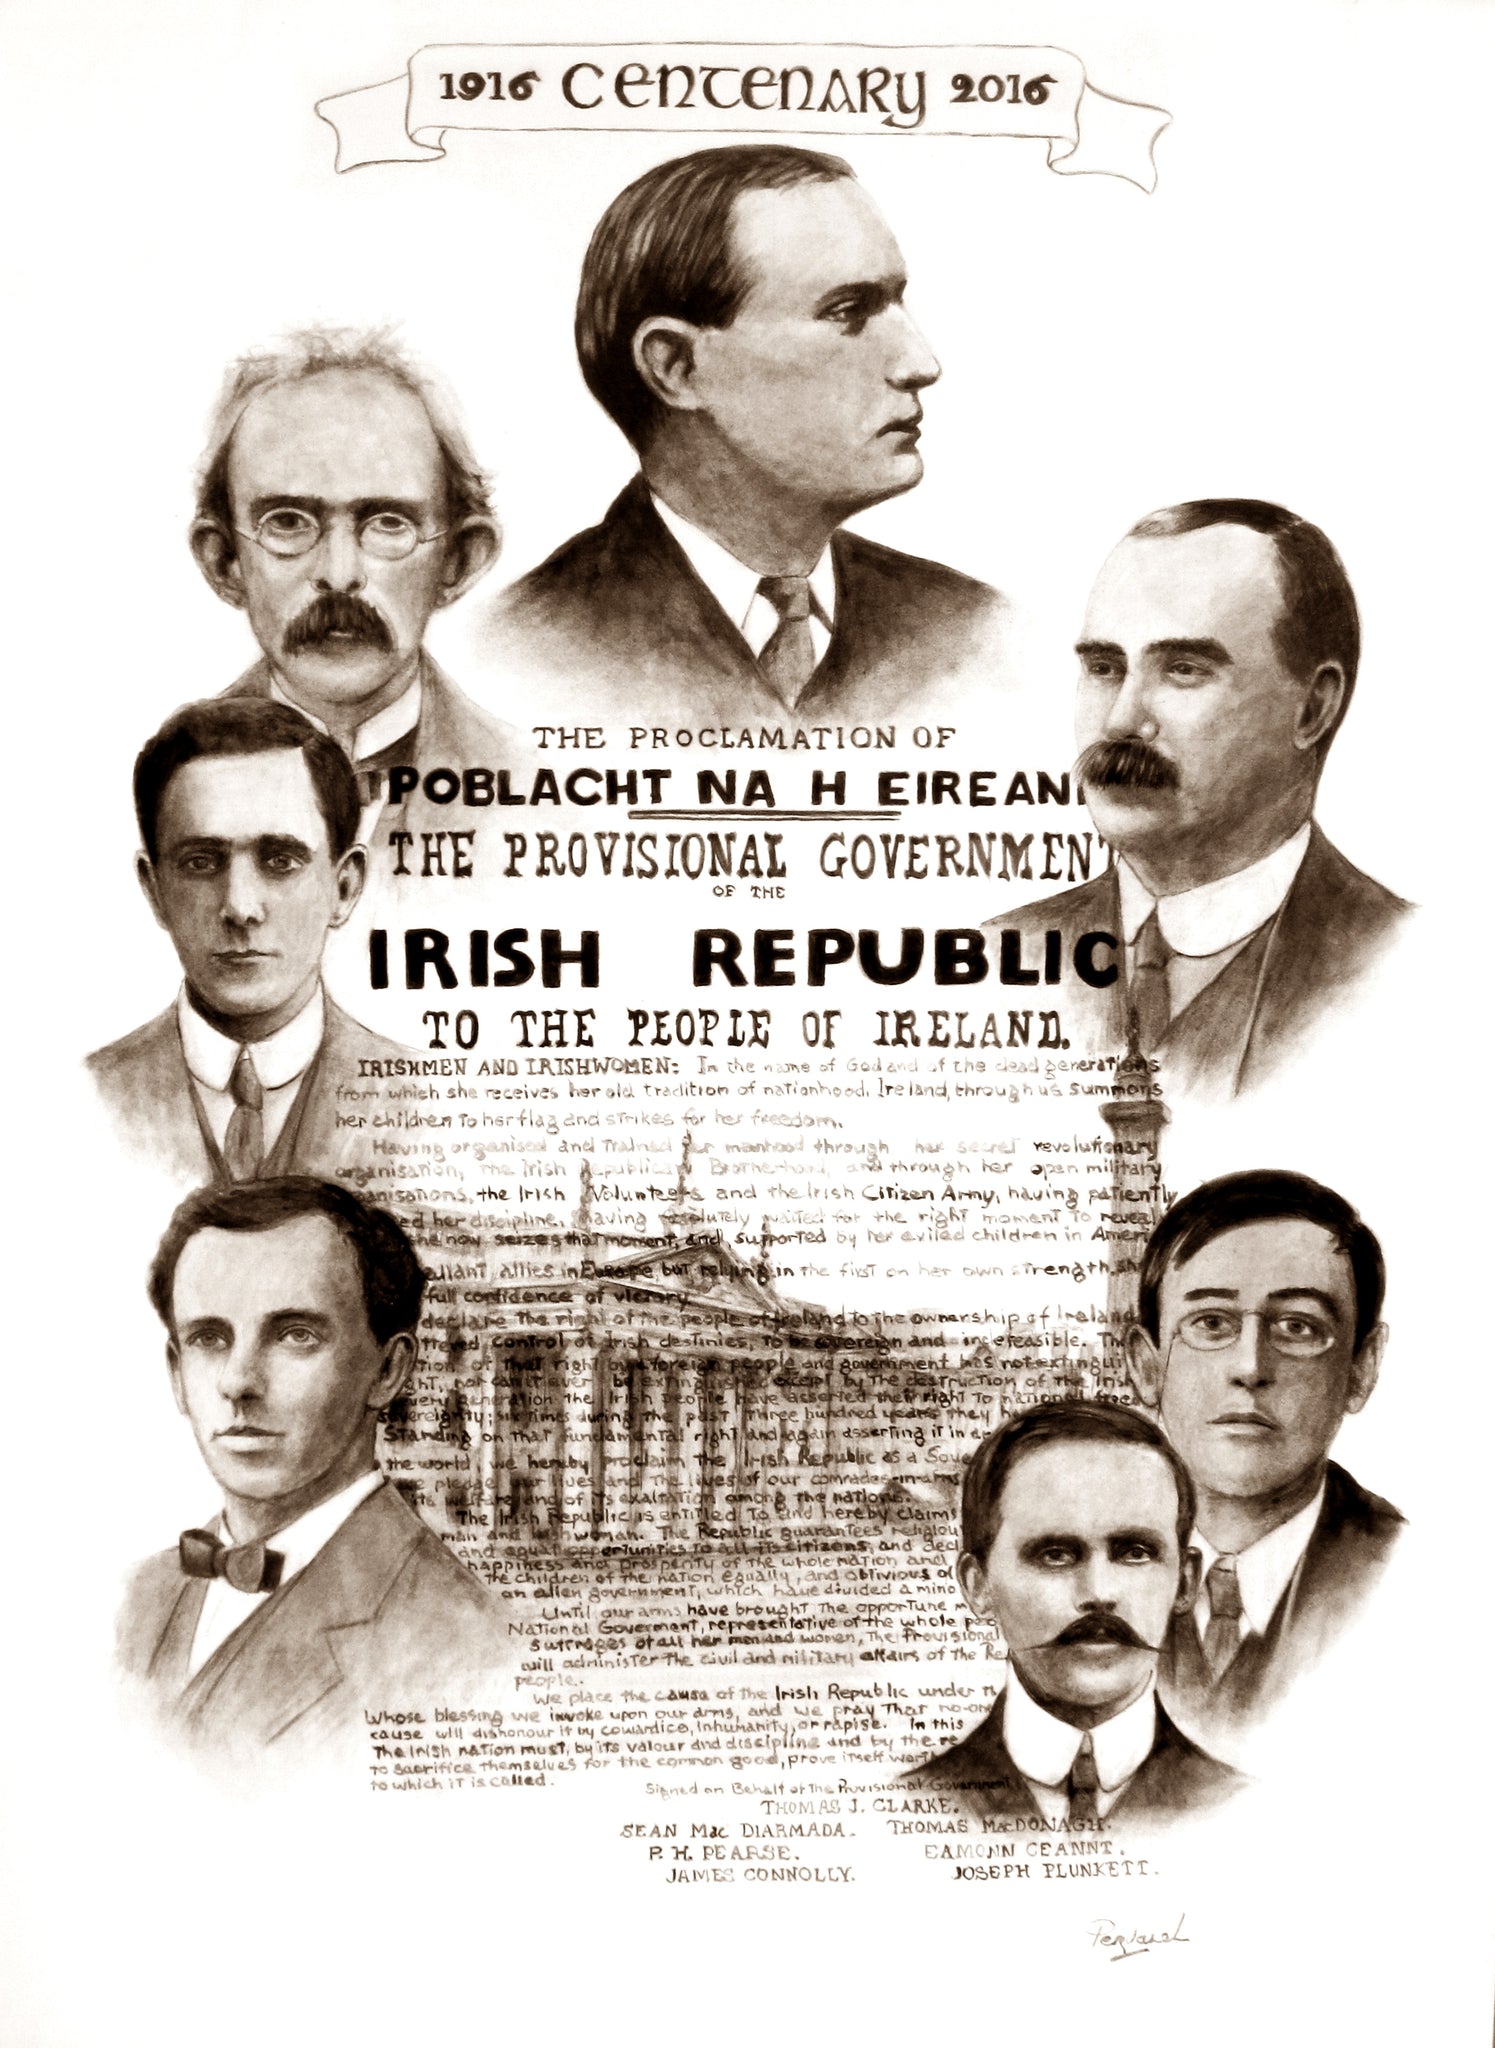 Pervaneh  "Signatories of the 1916 Proclamation"